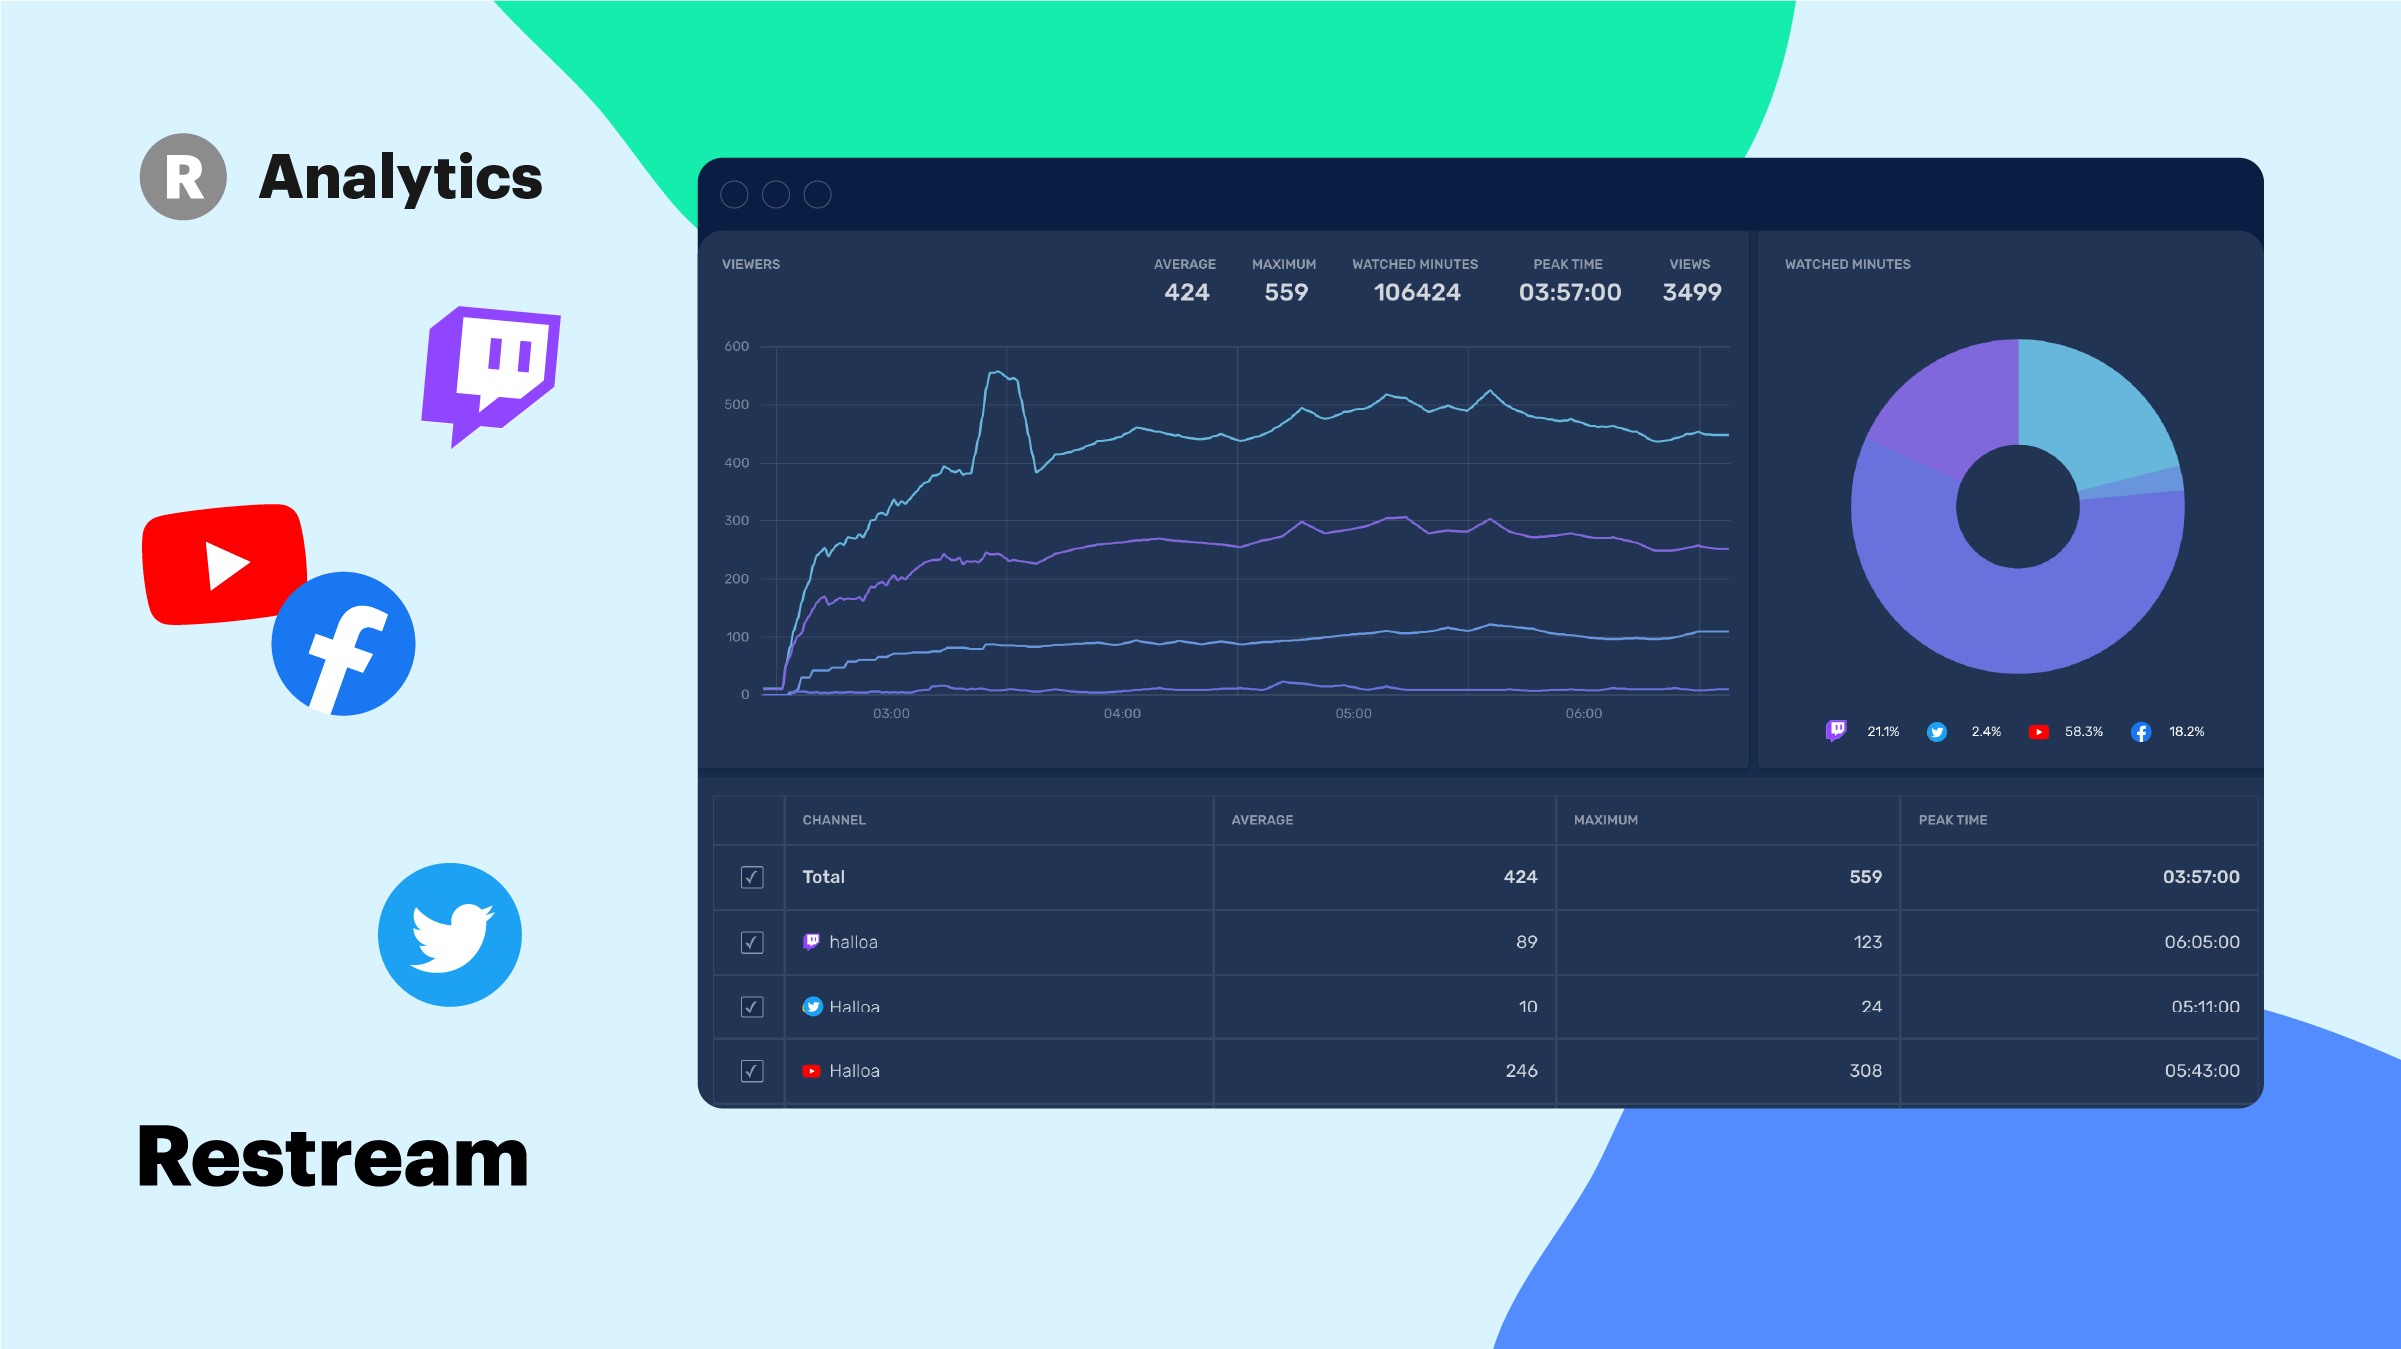 https://restream.io/blog/content/images/size/w1200/2021/03/restream-analytics-full-guide-tw-fb.png